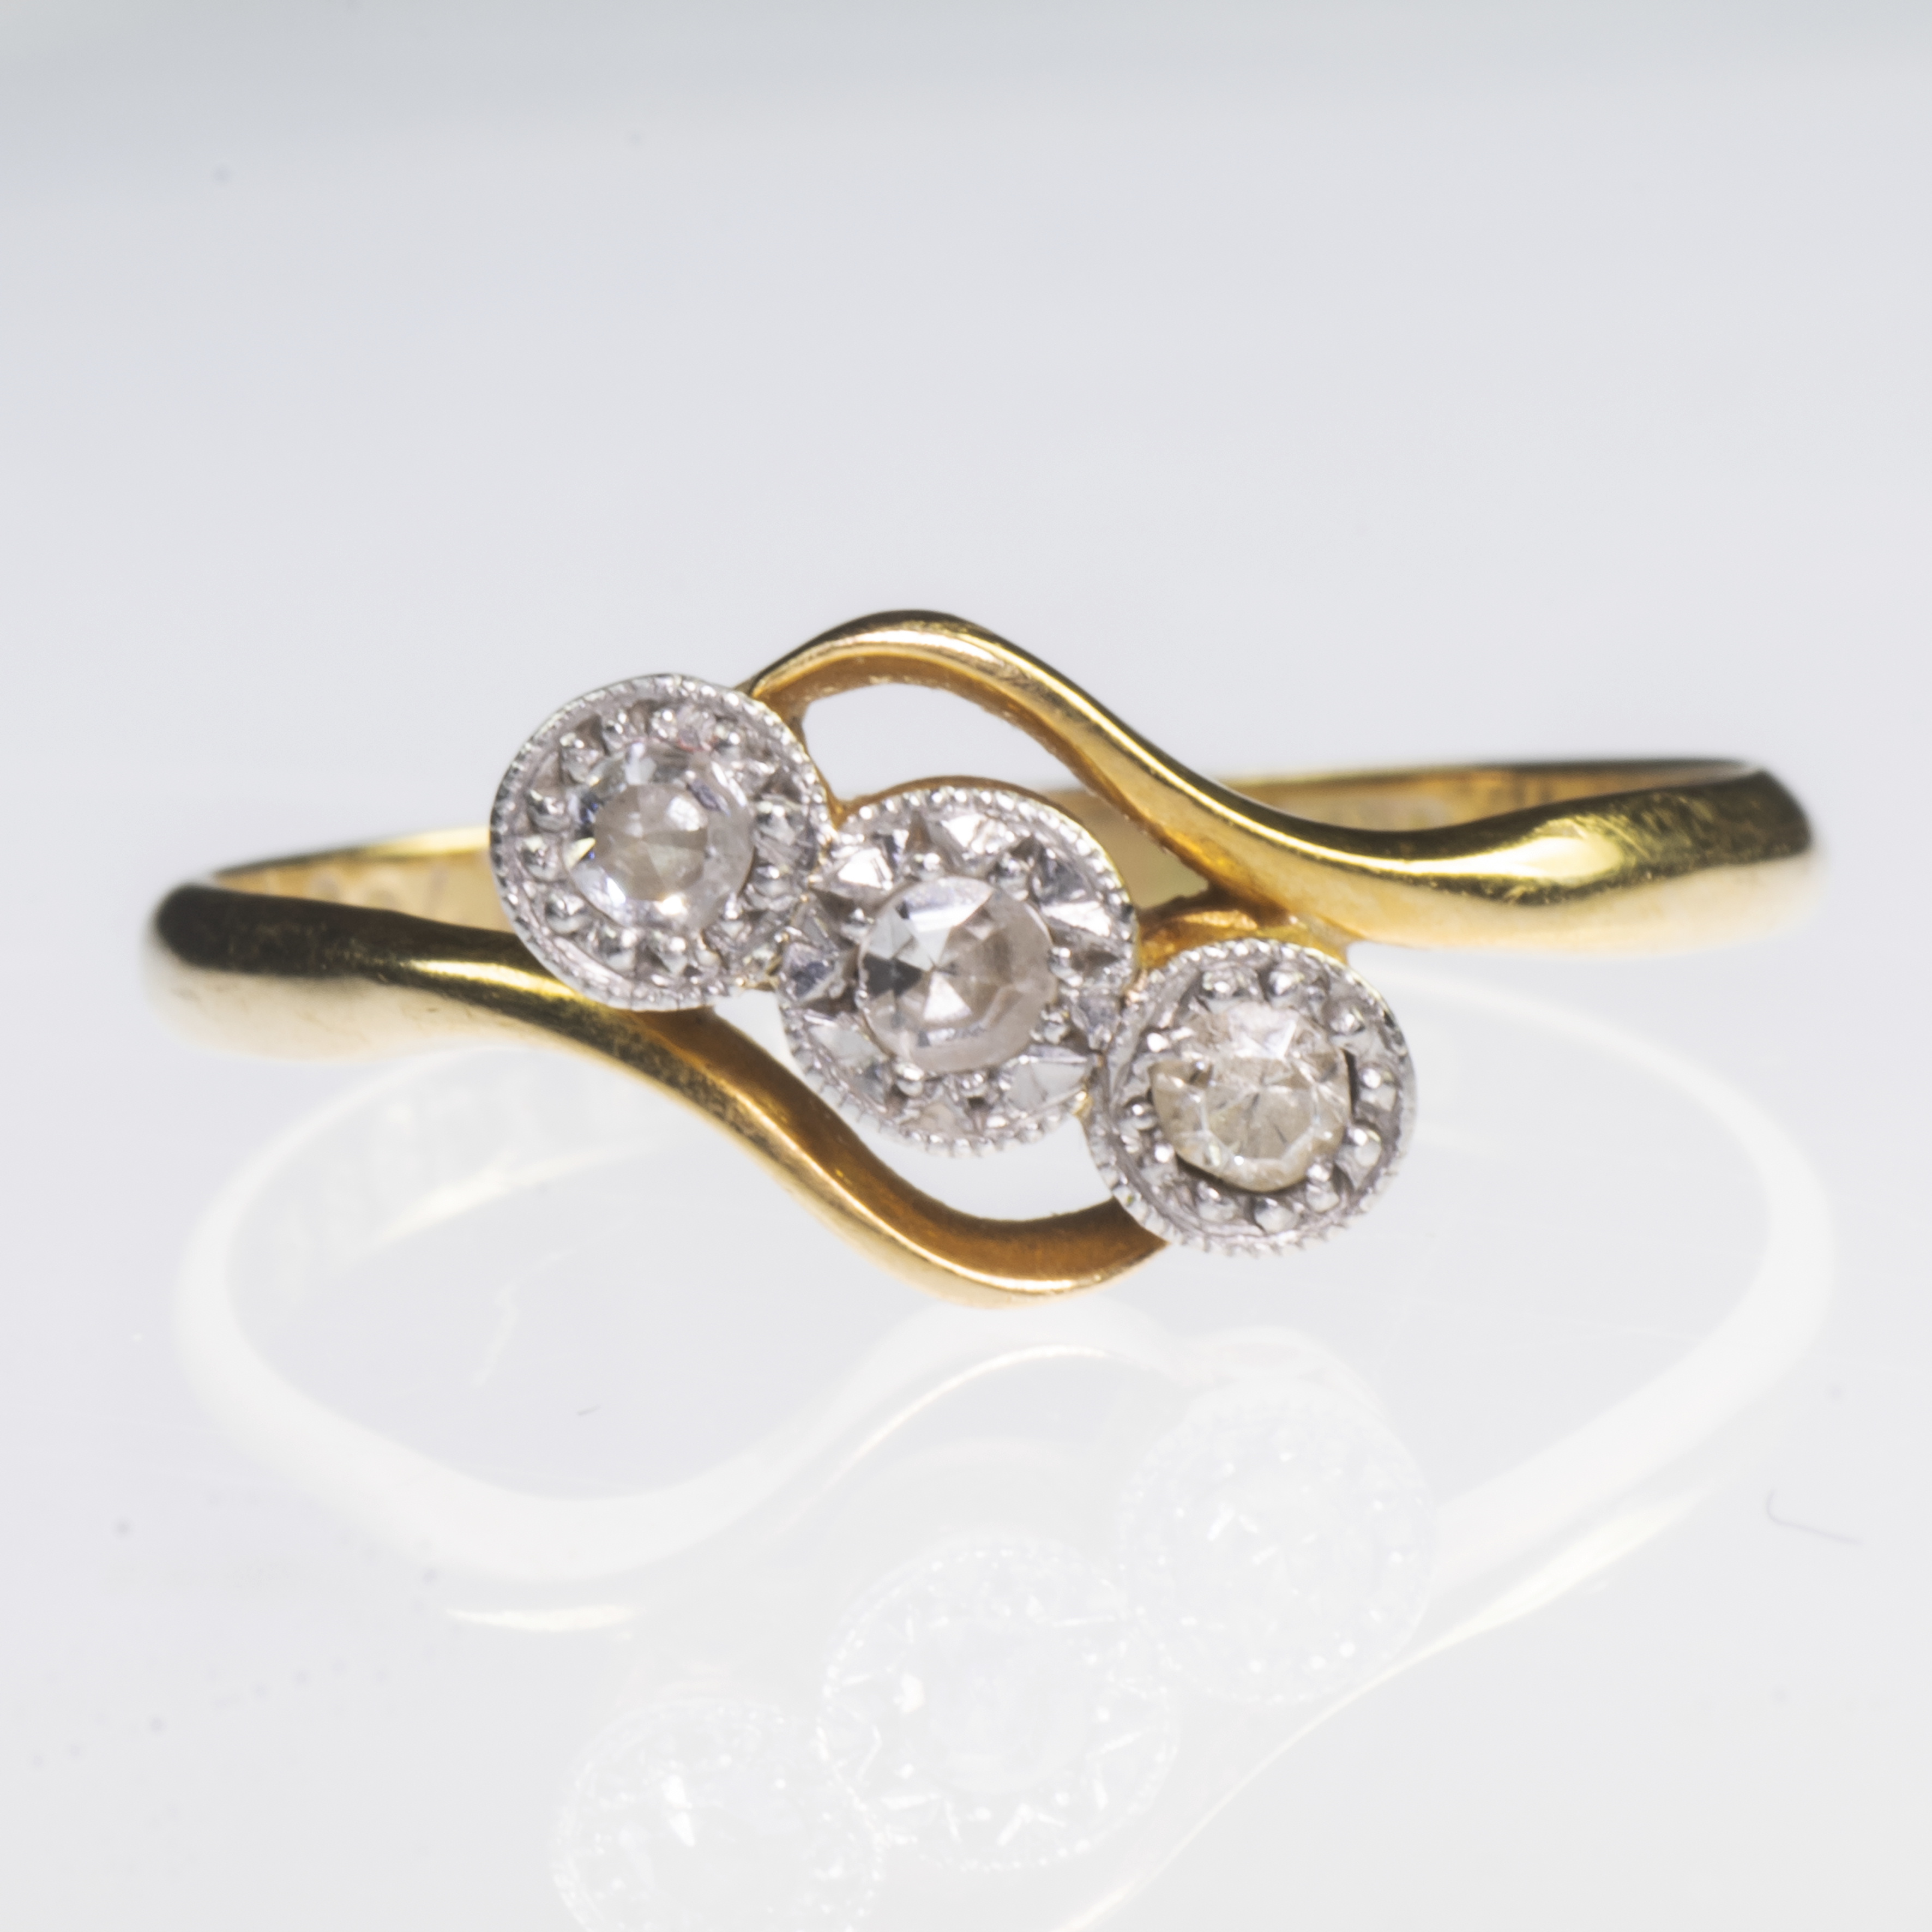 AN 18CT YELLOW GOLD AND PLATINUM DIAMOND SET CROSSOVER RING